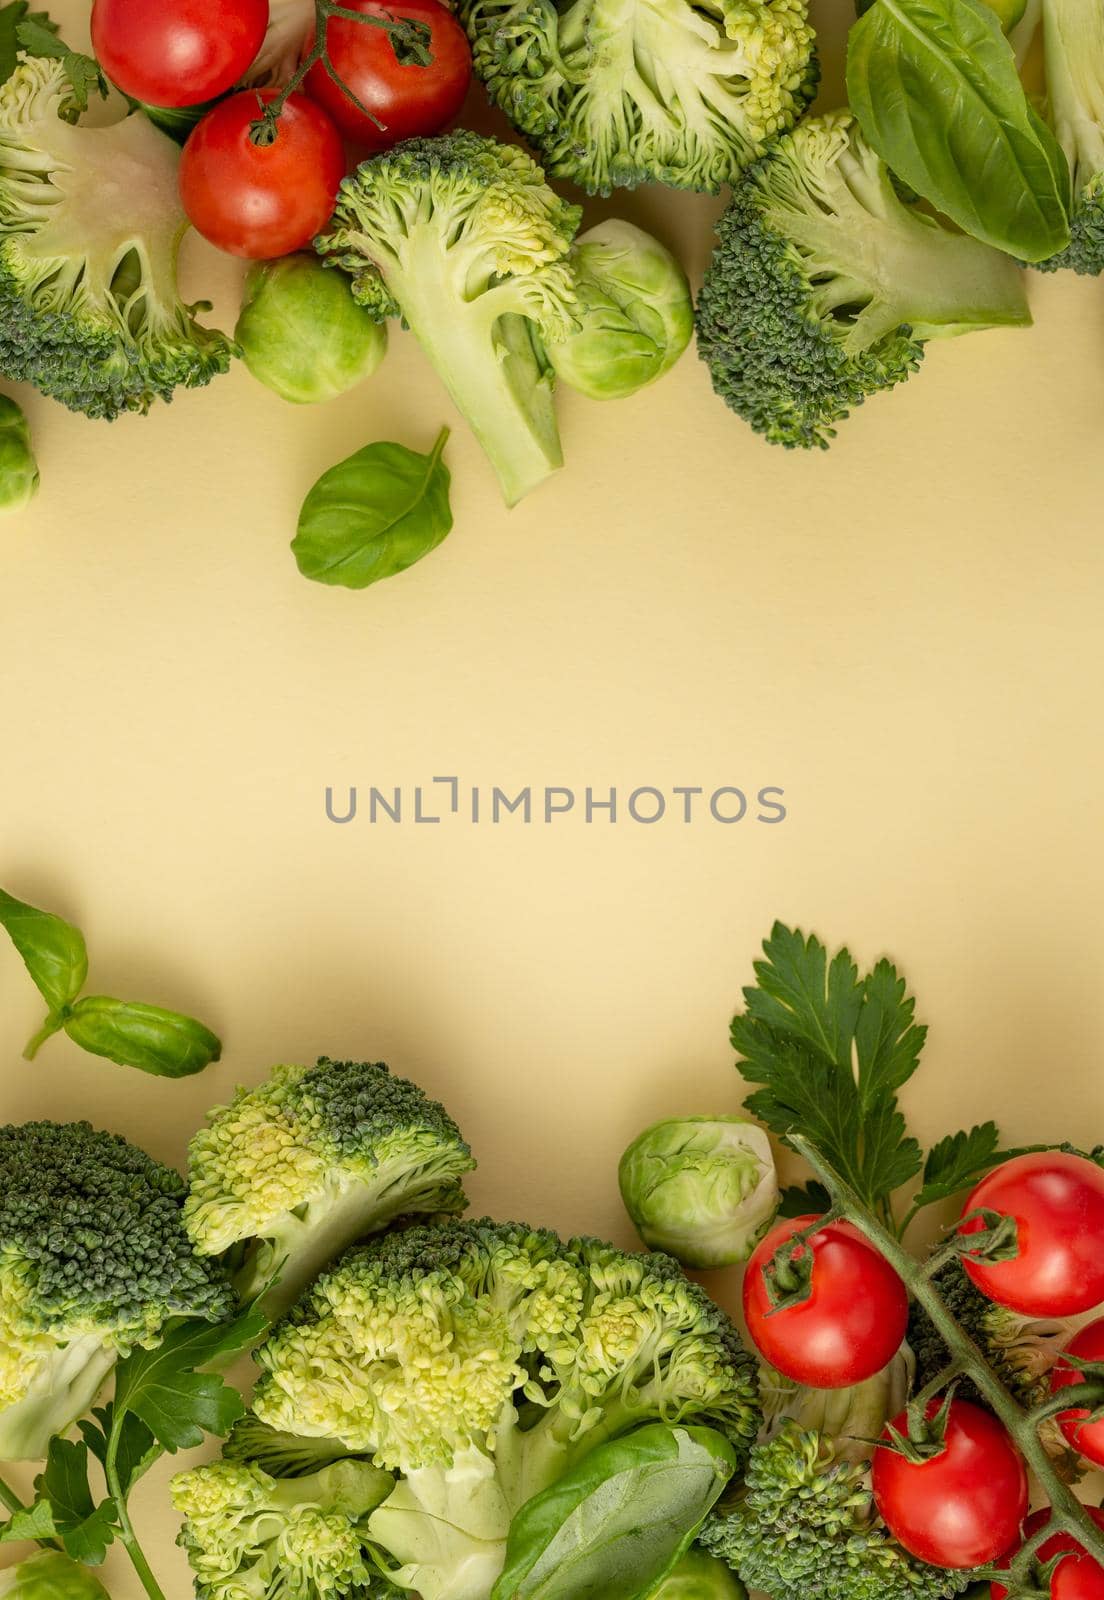 Vegetables food pattern made of broccoli, Brussels sprouts, tomatoes, herbs on light pastel background. Minimal flat lay design, nutrition, healthy eating, diets, vitamins. Top view, space for text